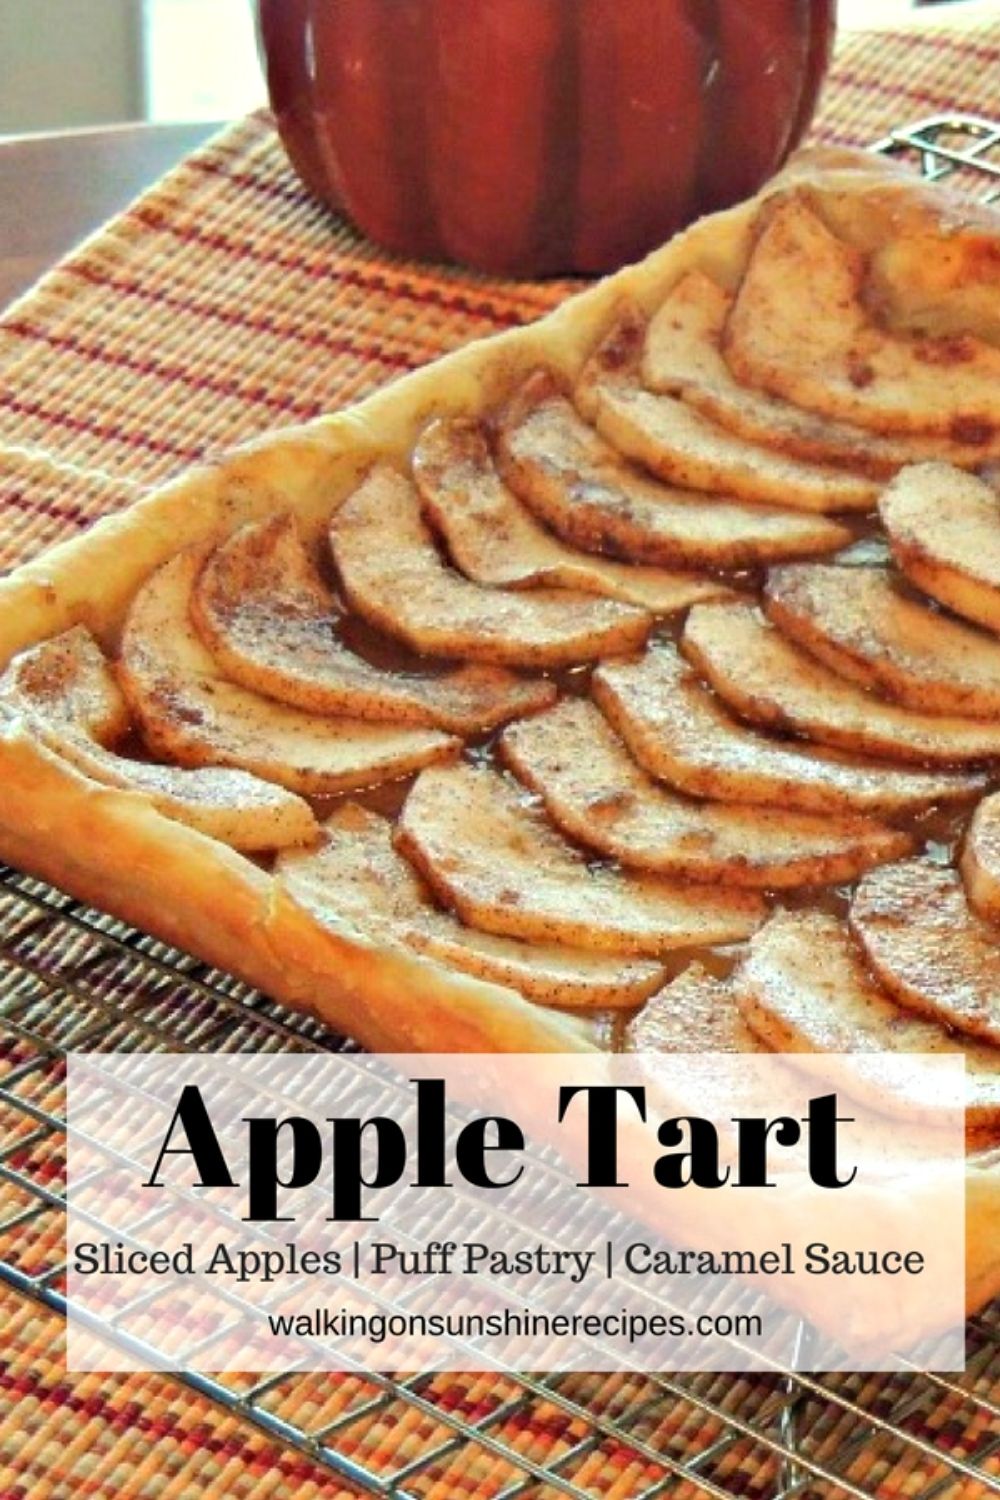 sliced apples, puff pastry, caramel sauce. 